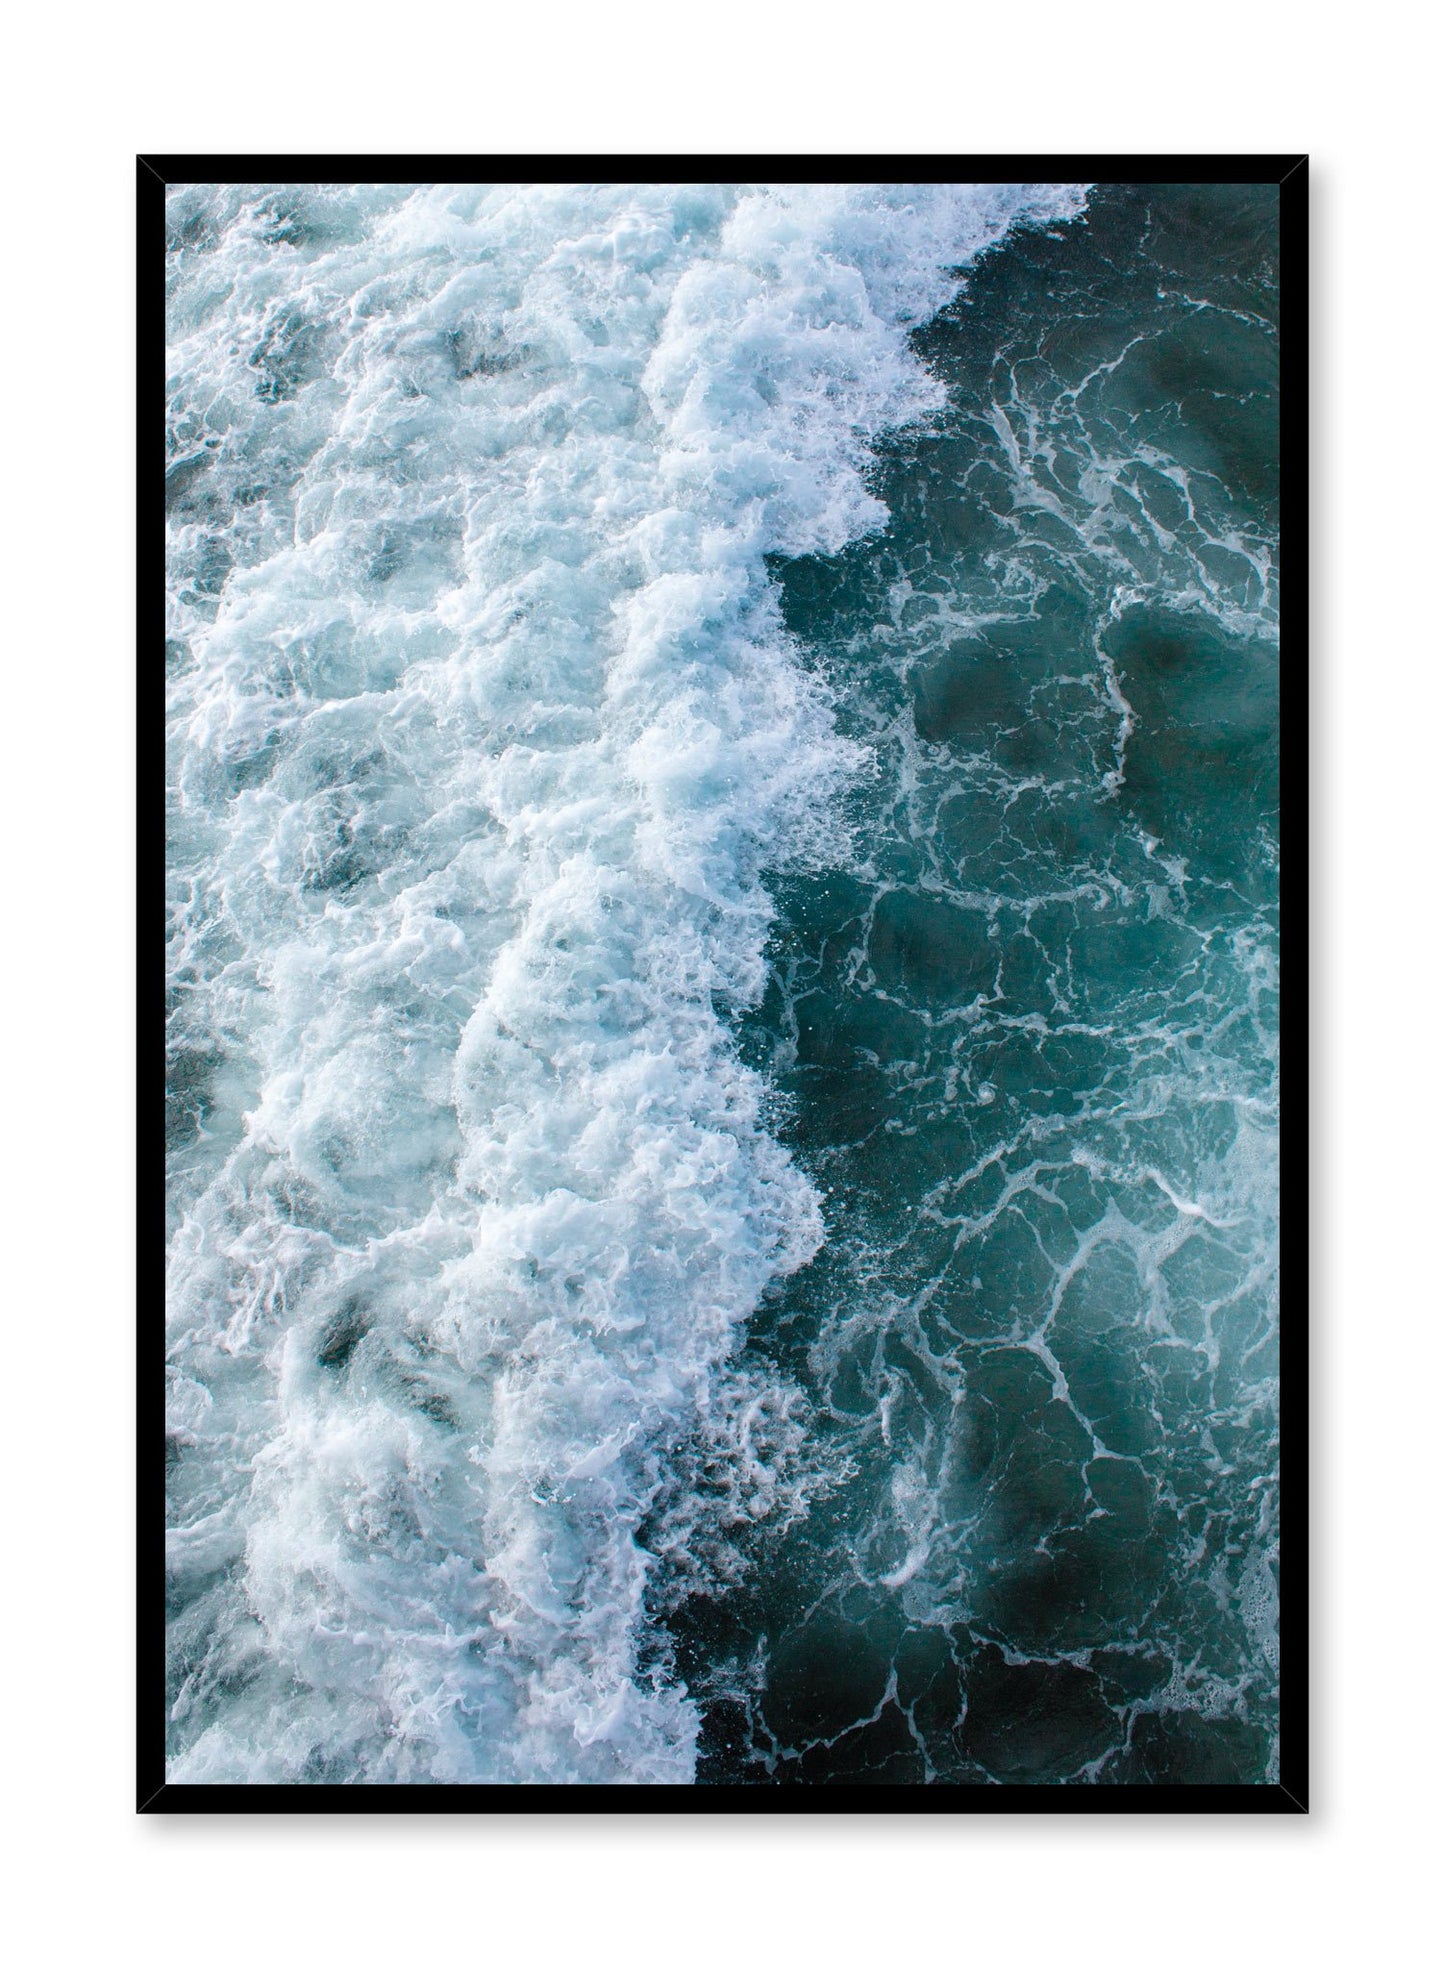 Modern minimalist poster by Opposite Wall with Emerald waters photography